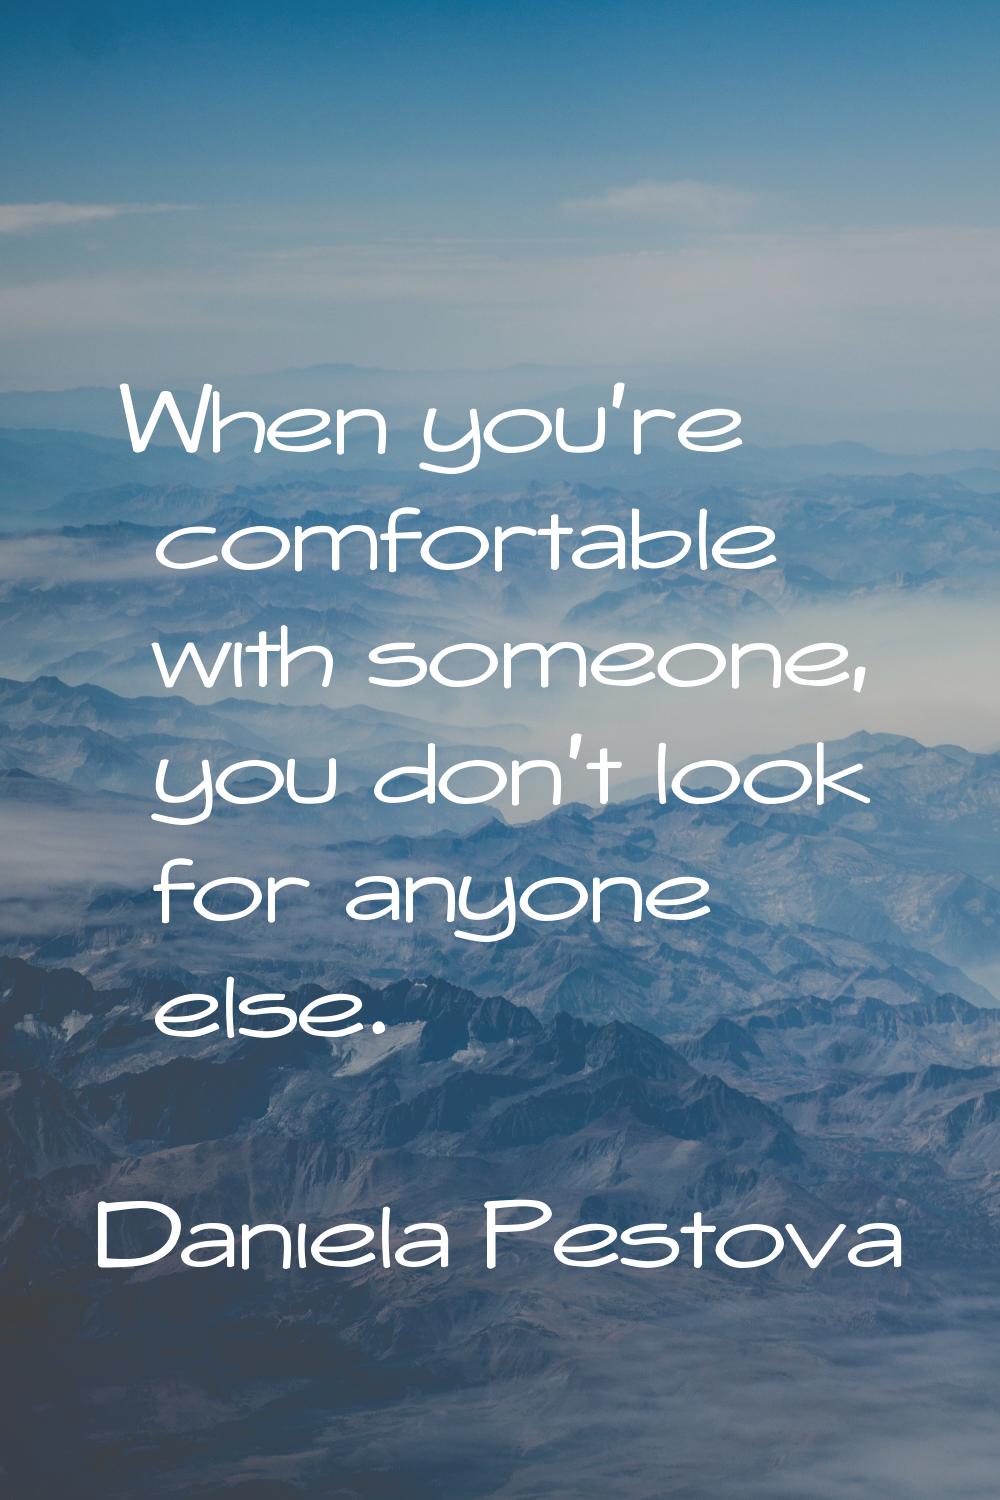 When you're comfortable with someone, you don't look for anyone else.